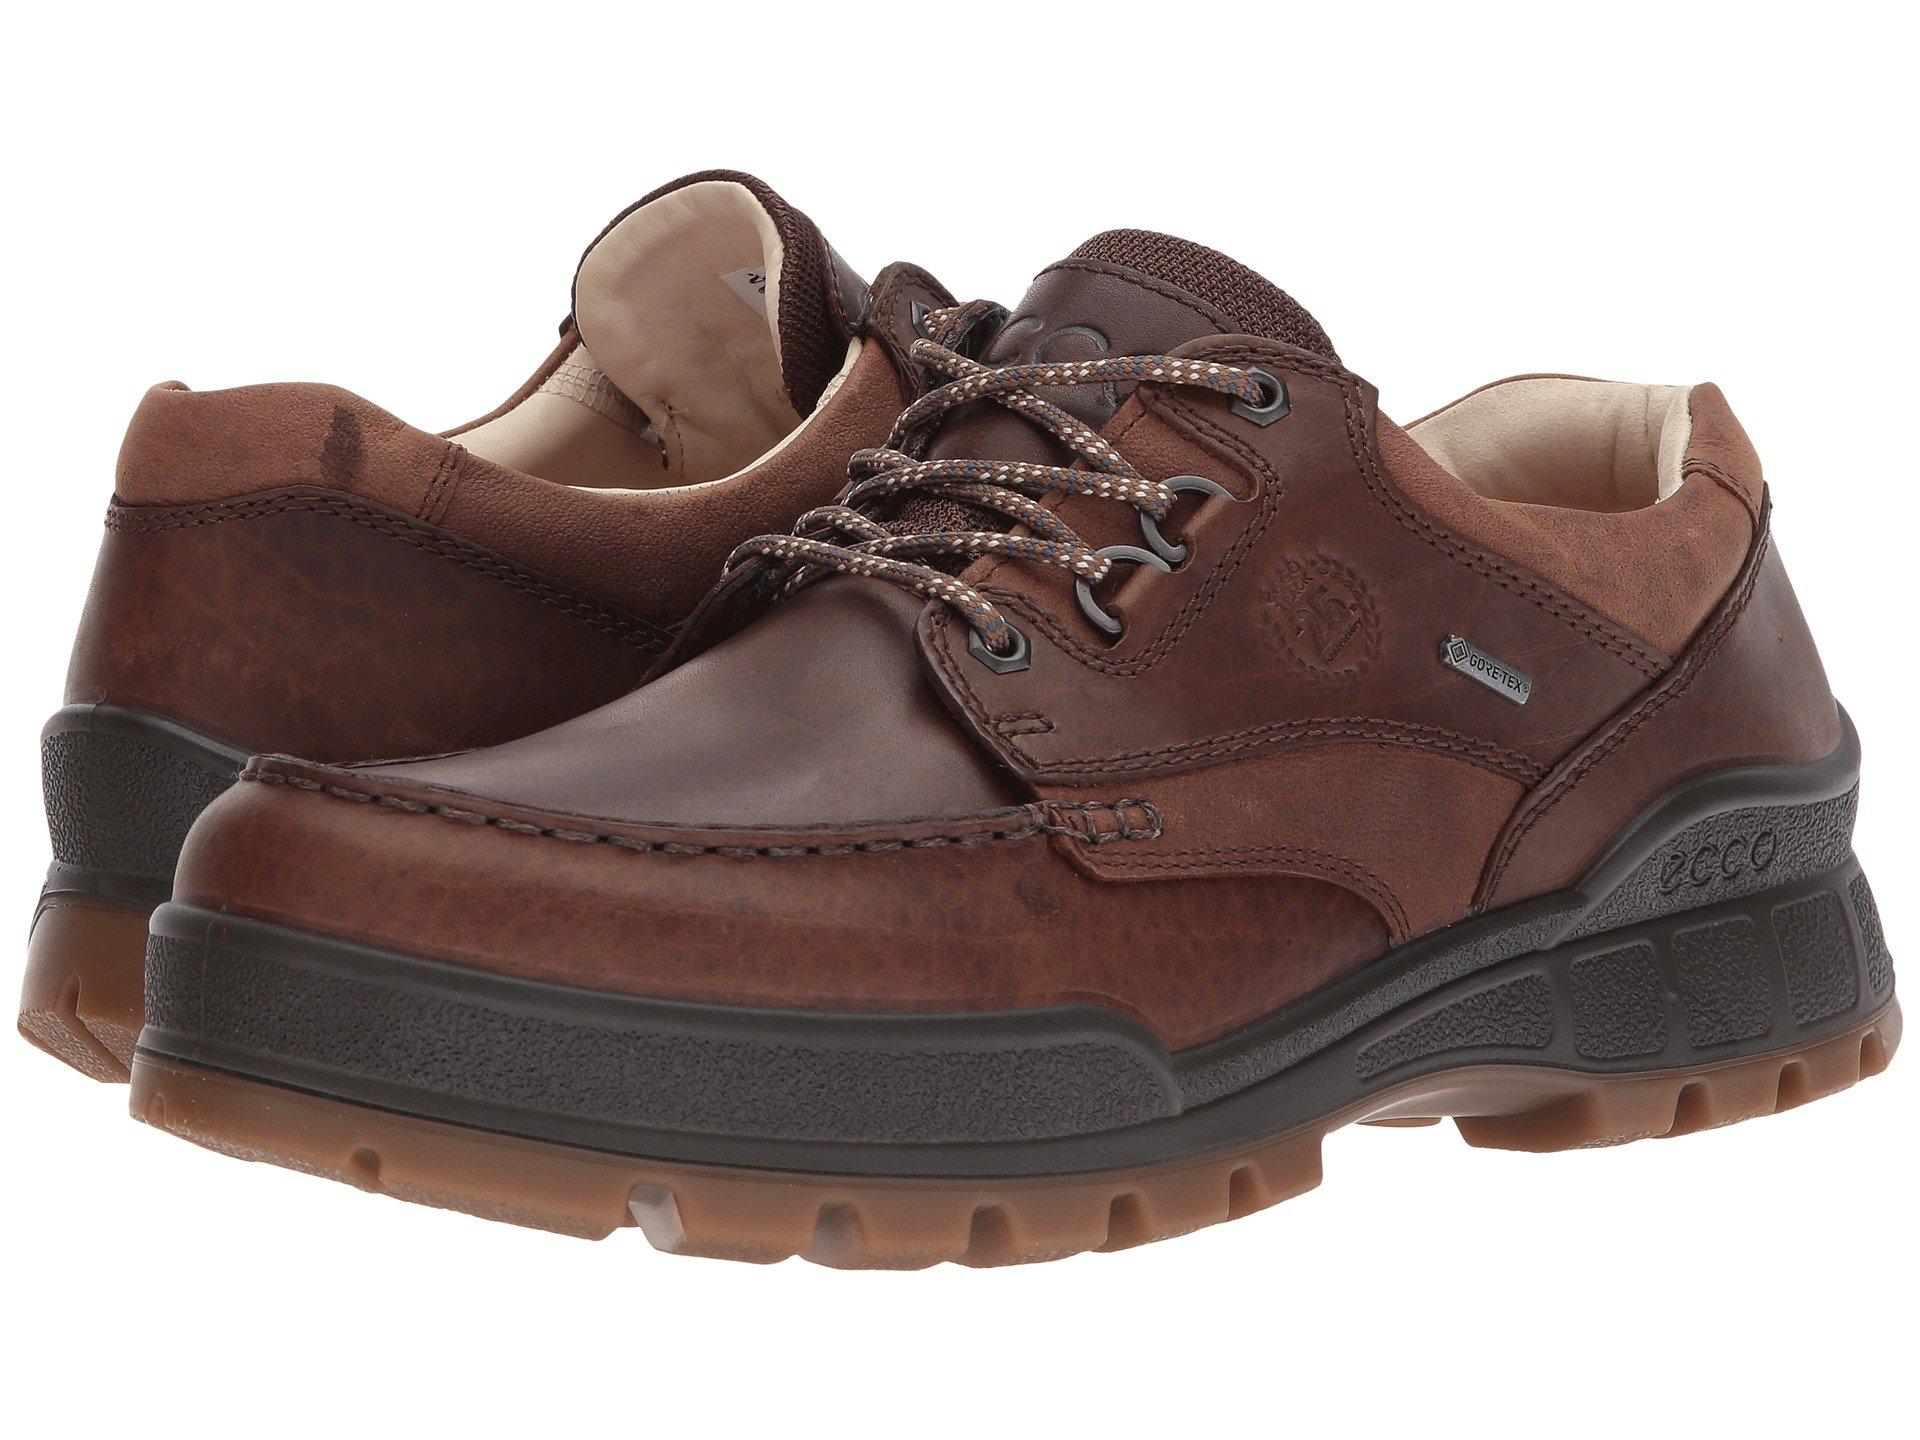 Ecco Leather Track 25 Premium Low in Cocoa Brown/Camel (Brown) for Men ...